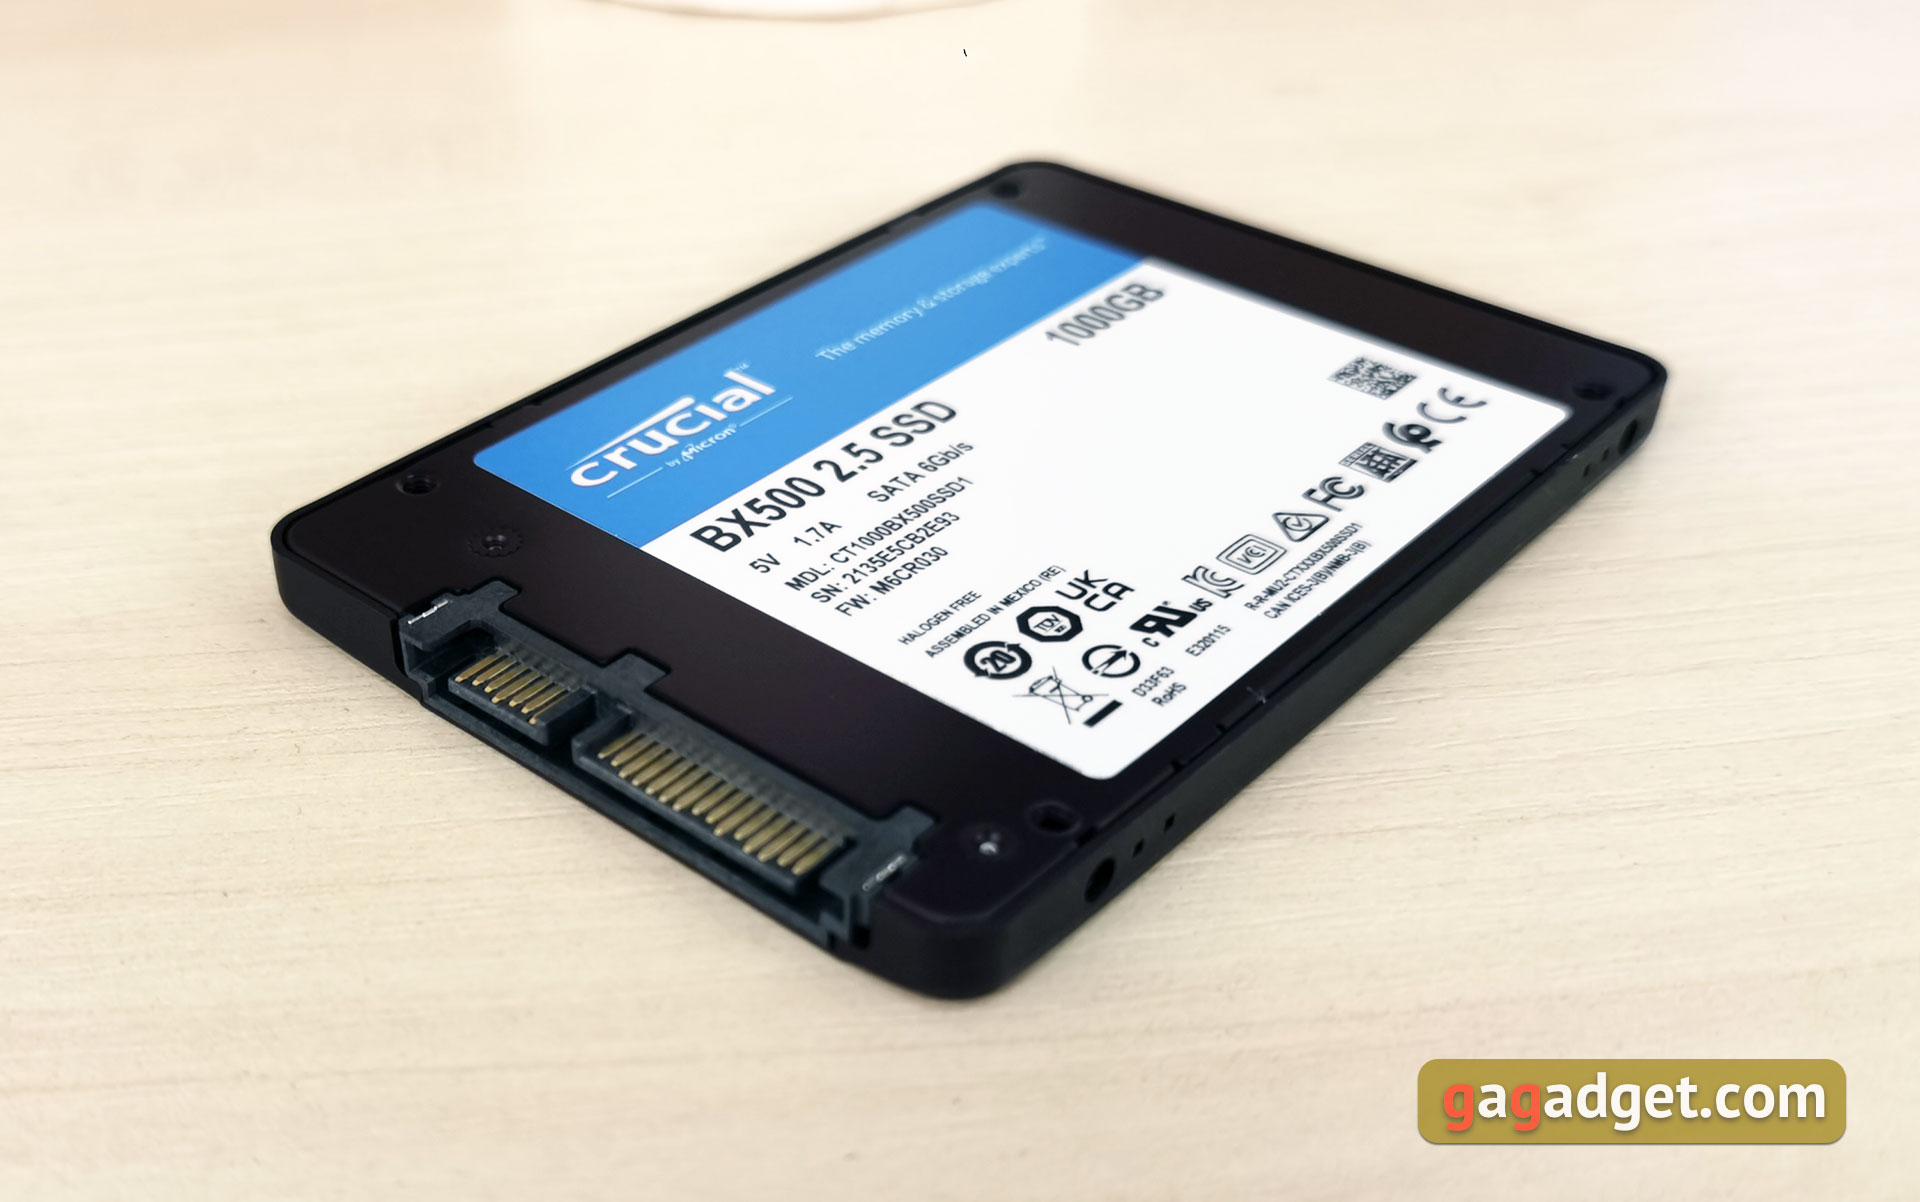 Crucial BX500 1TB Review: Low-Cost SSD as a Storage instead of HDD